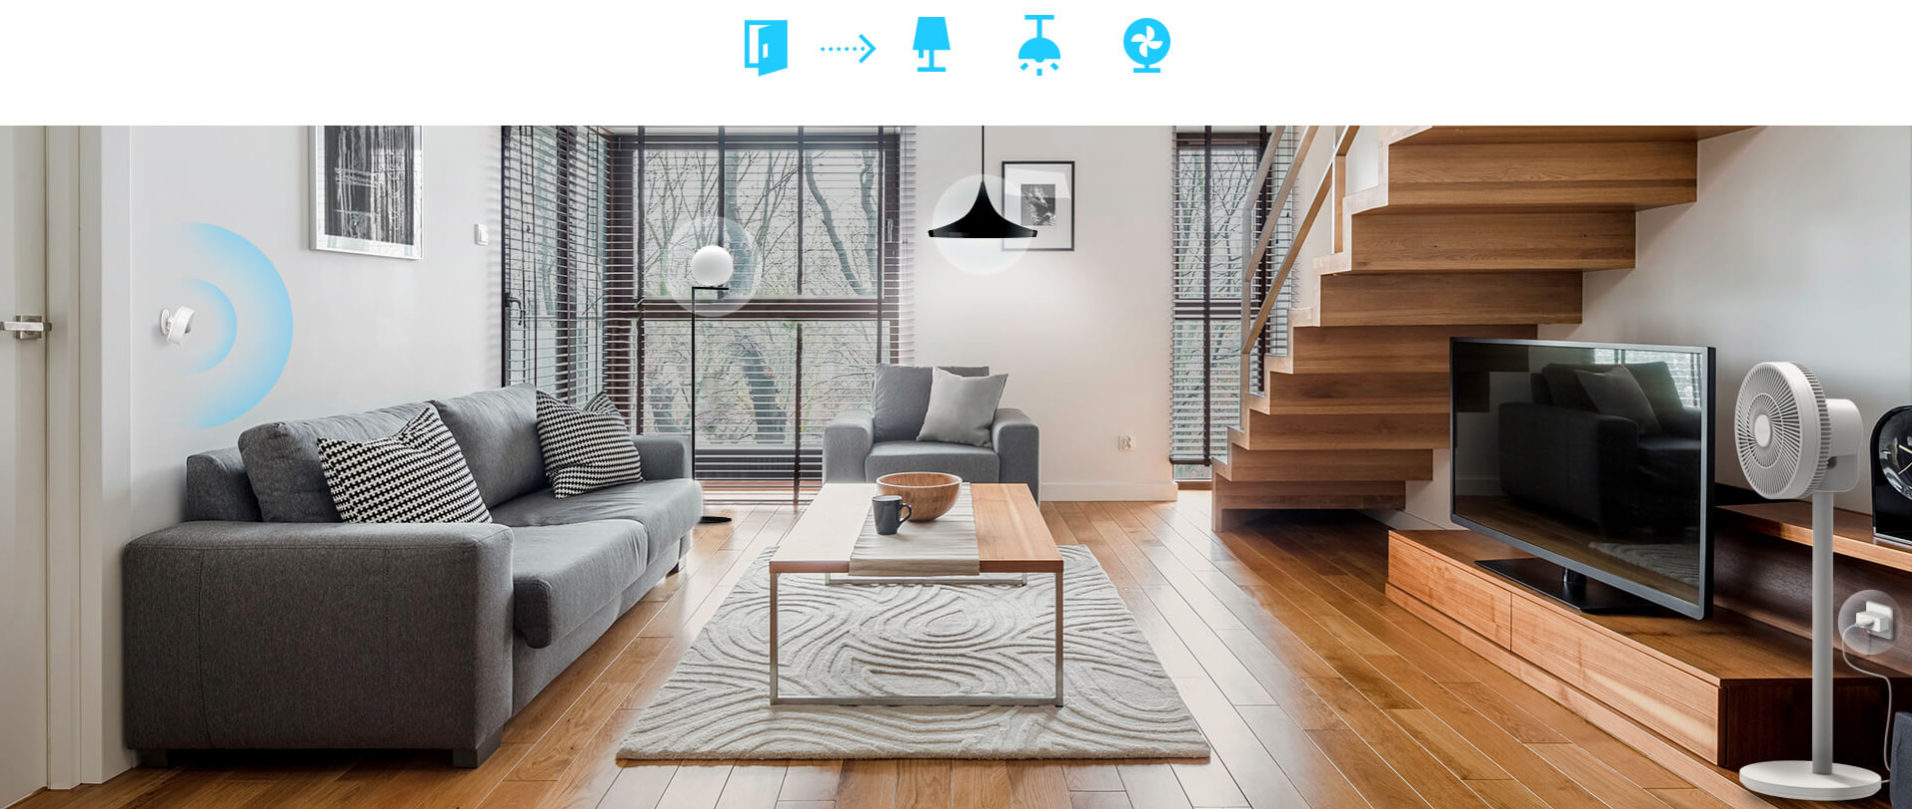 Motion Control an Entire Room
Create a Smart Action to automate your smart devices and activate them all with motion. Customize your own Smart Actions to group your Tapo products together any way you want.